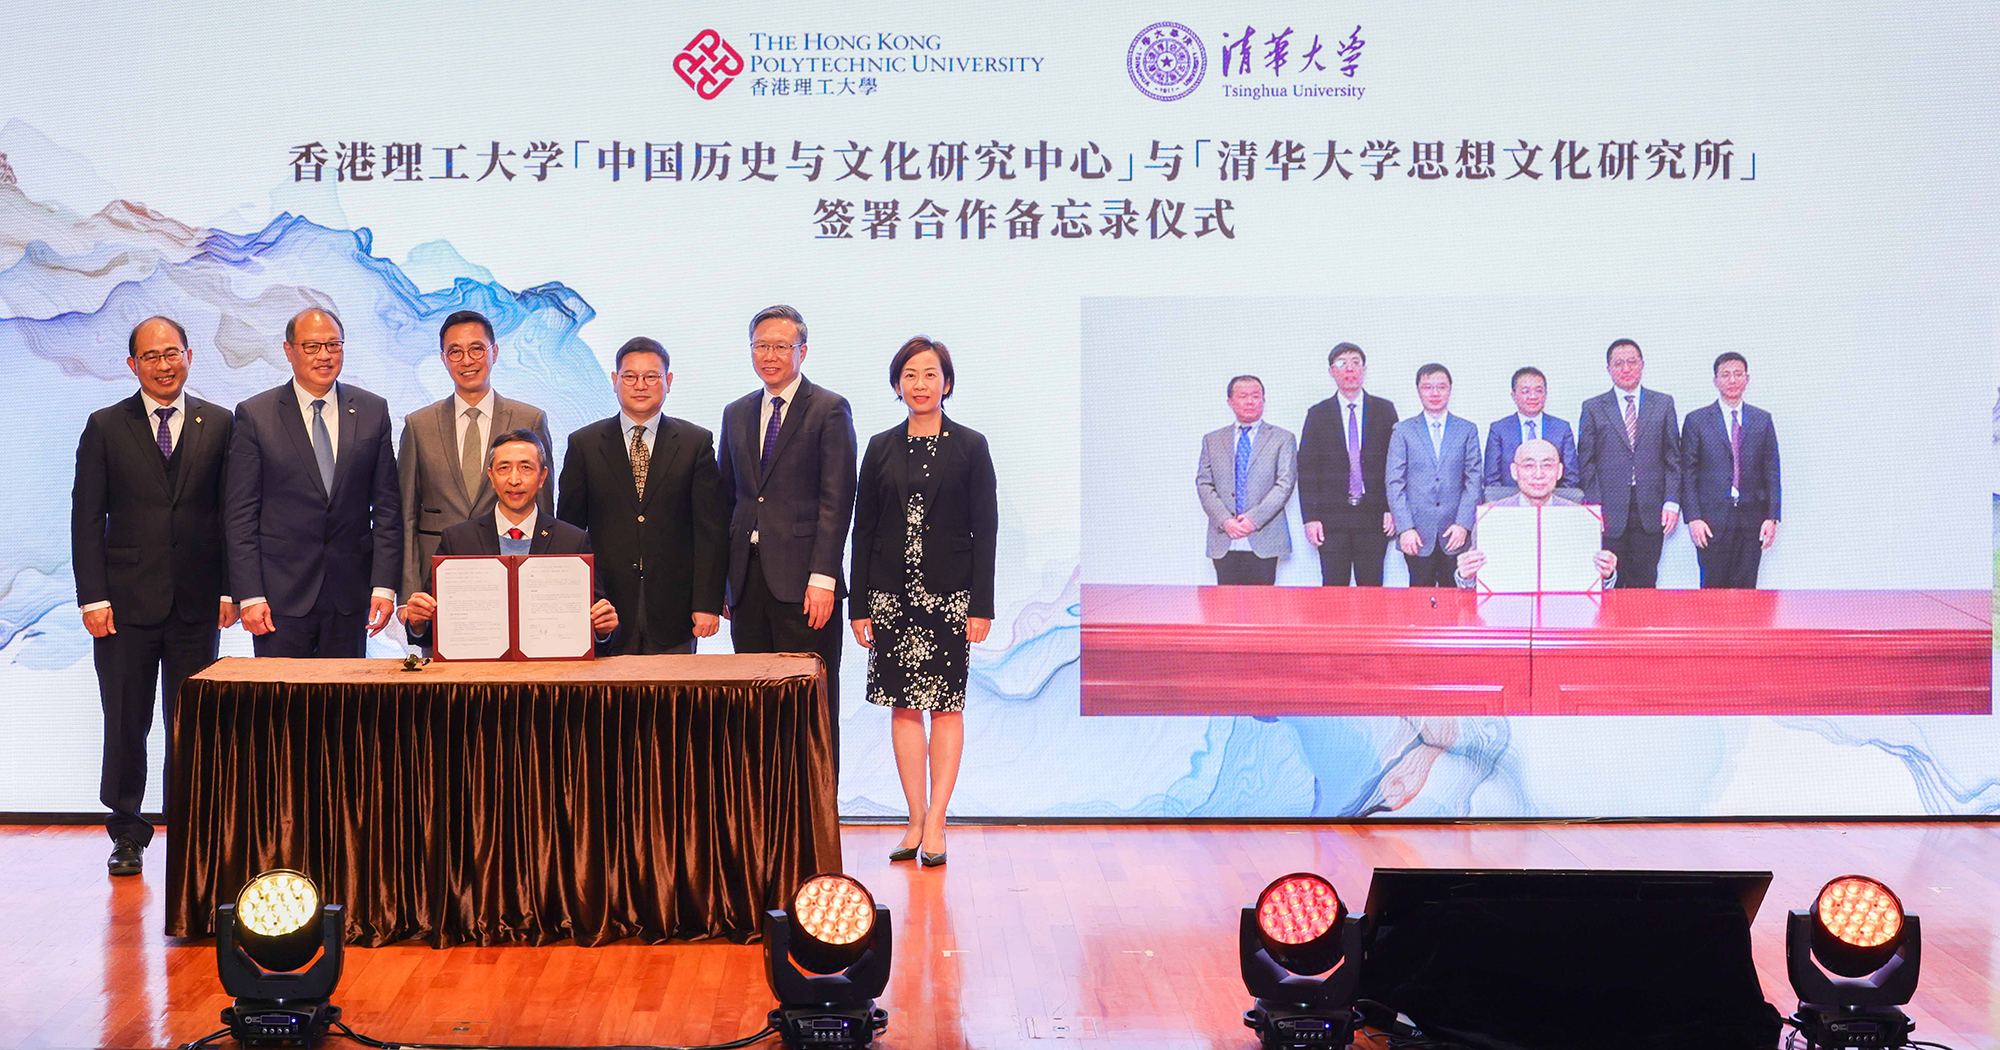 The Research Centre signed an MoU with the Institute of Humanities of Tsinghua University on 17 January 2023. Mr Kevin Yeung (rear, 3rd from left), Mr Zhang Guoyi (rear, 4th from left), and leaders of PolyU and Tsinghua University witnessed the signing by Prof. Li Ping (left, seated) and Prof. Zhong Weimin, Chairman of the Department of History, Tsinghua University (right, seated). PolyU witnesses (rear): Dr Lam Tai-fai (2nd from left), Prof. Jin-Guang Teng (5th from left), Prof. Wing-tak Wong (1st from left), Executive Vice President Dr Miranda Lou (6th from left). Tsinghua University witnesses (rear): Prof. Peng Gang, Vice President (3rd from right); Prof. NI Yuping, Associate Dean of the School of Humanities (4th from right), and the Department of History’s Prof. A Feng (2nd from right), Dr Gu Tao (5th from right), Dr Sun Zhengjun (1st from right), and Dr Huang Zhengping (6th from right).